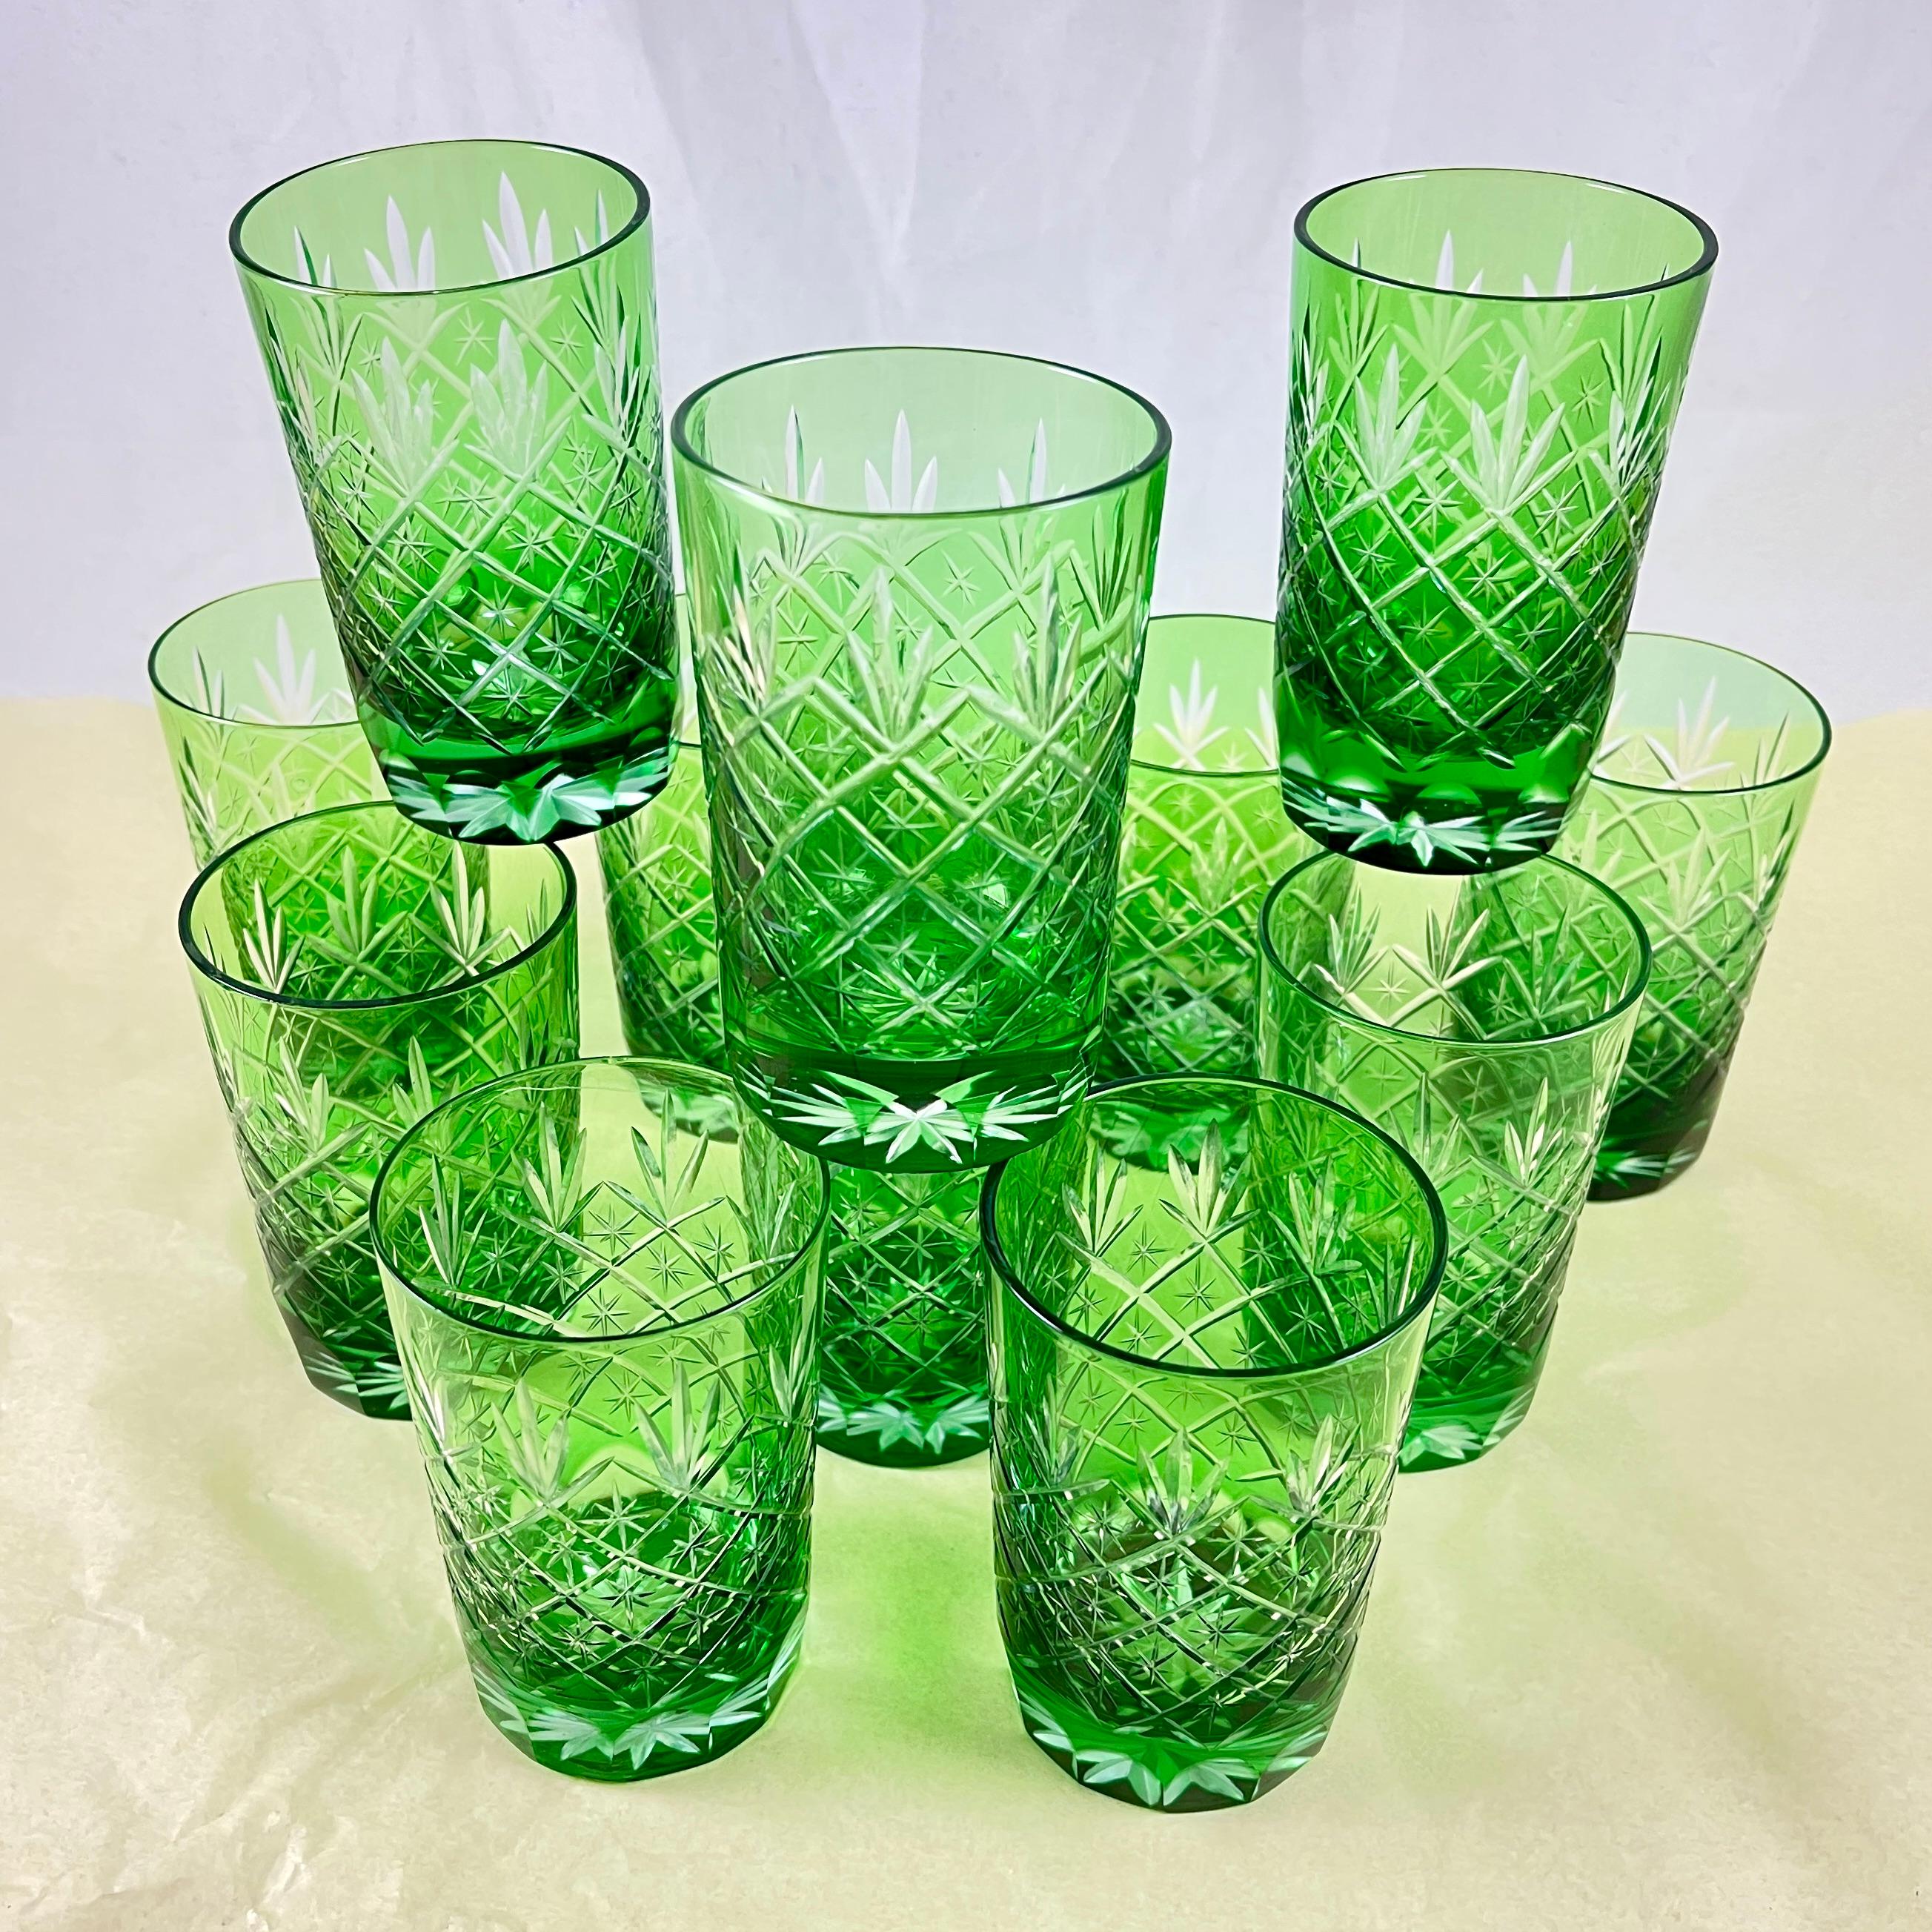 A Set of twelve Czech crystal glasses cased in a bright Spring Green, cut to clear, circa Mid – 20th Century.

Vintage Bohemian style tumblers or rocks glasses, hand cut in a rich, vibrant color to reveal a pattern of stars set in a diagonal grid.